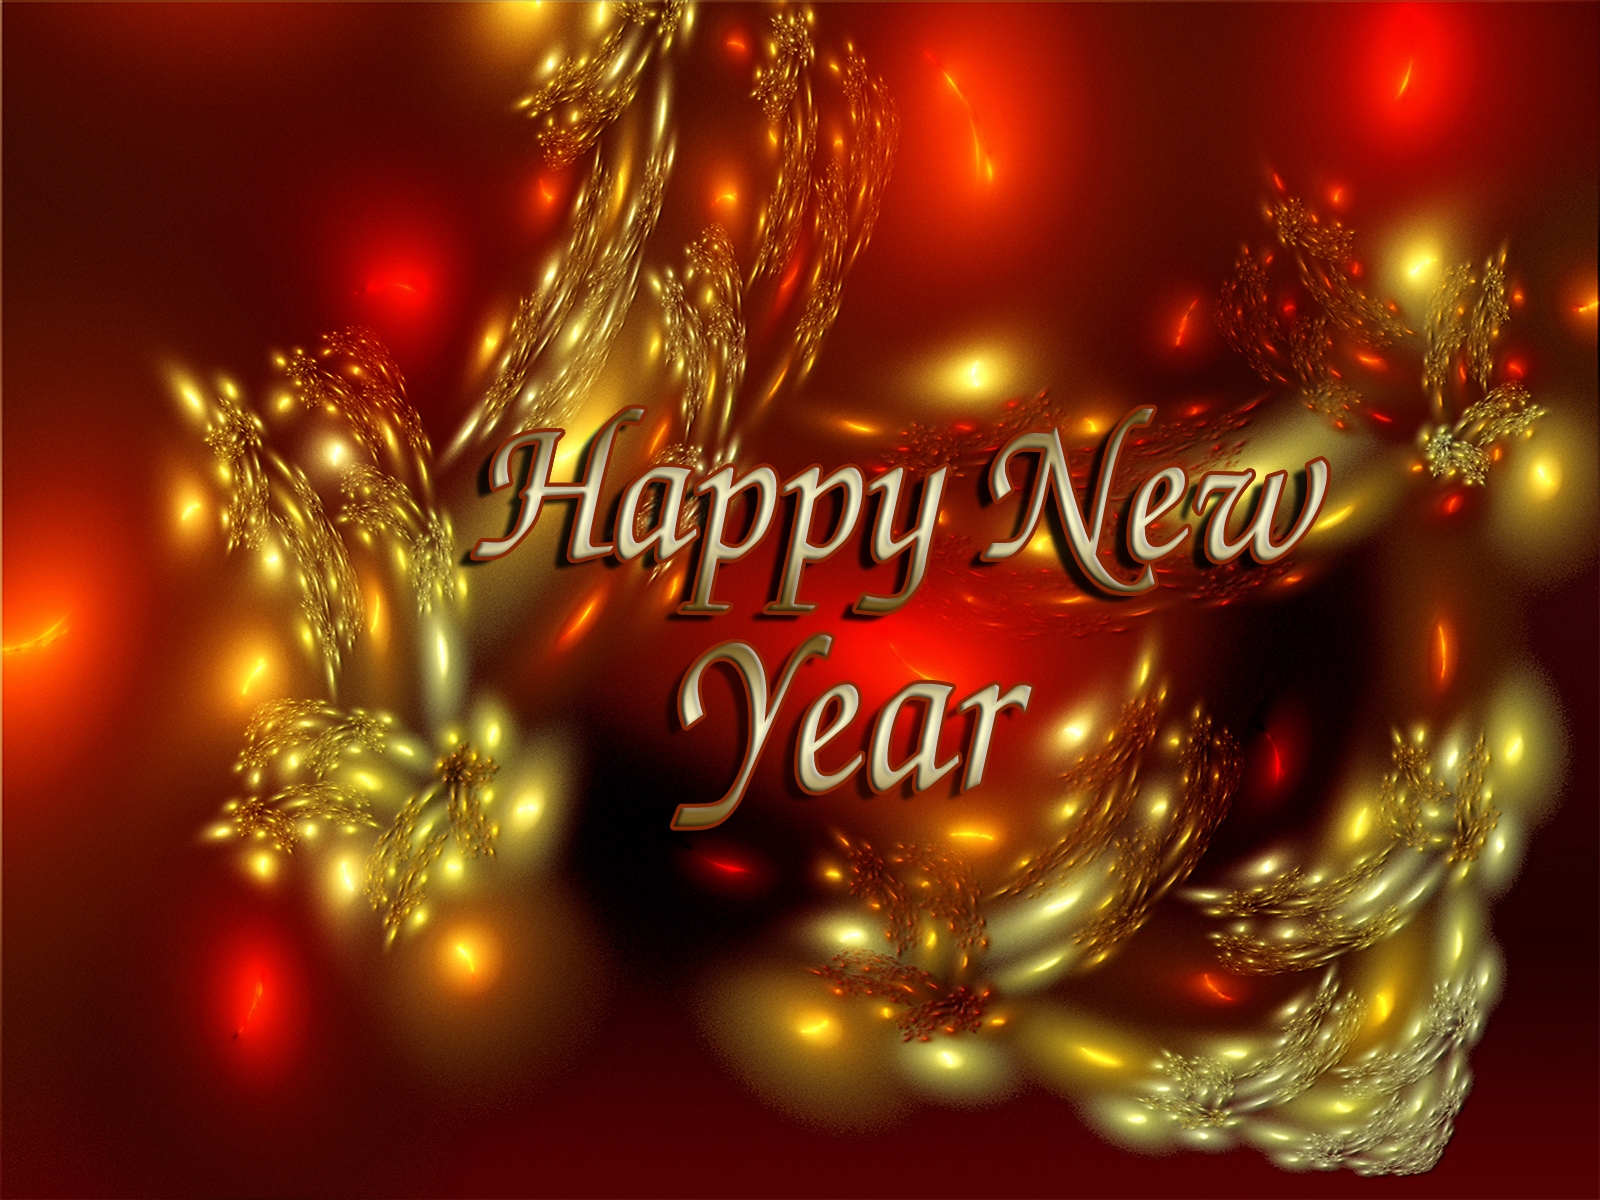 Wallpaper Proslut Happy New Years Wishes Greetings Photo